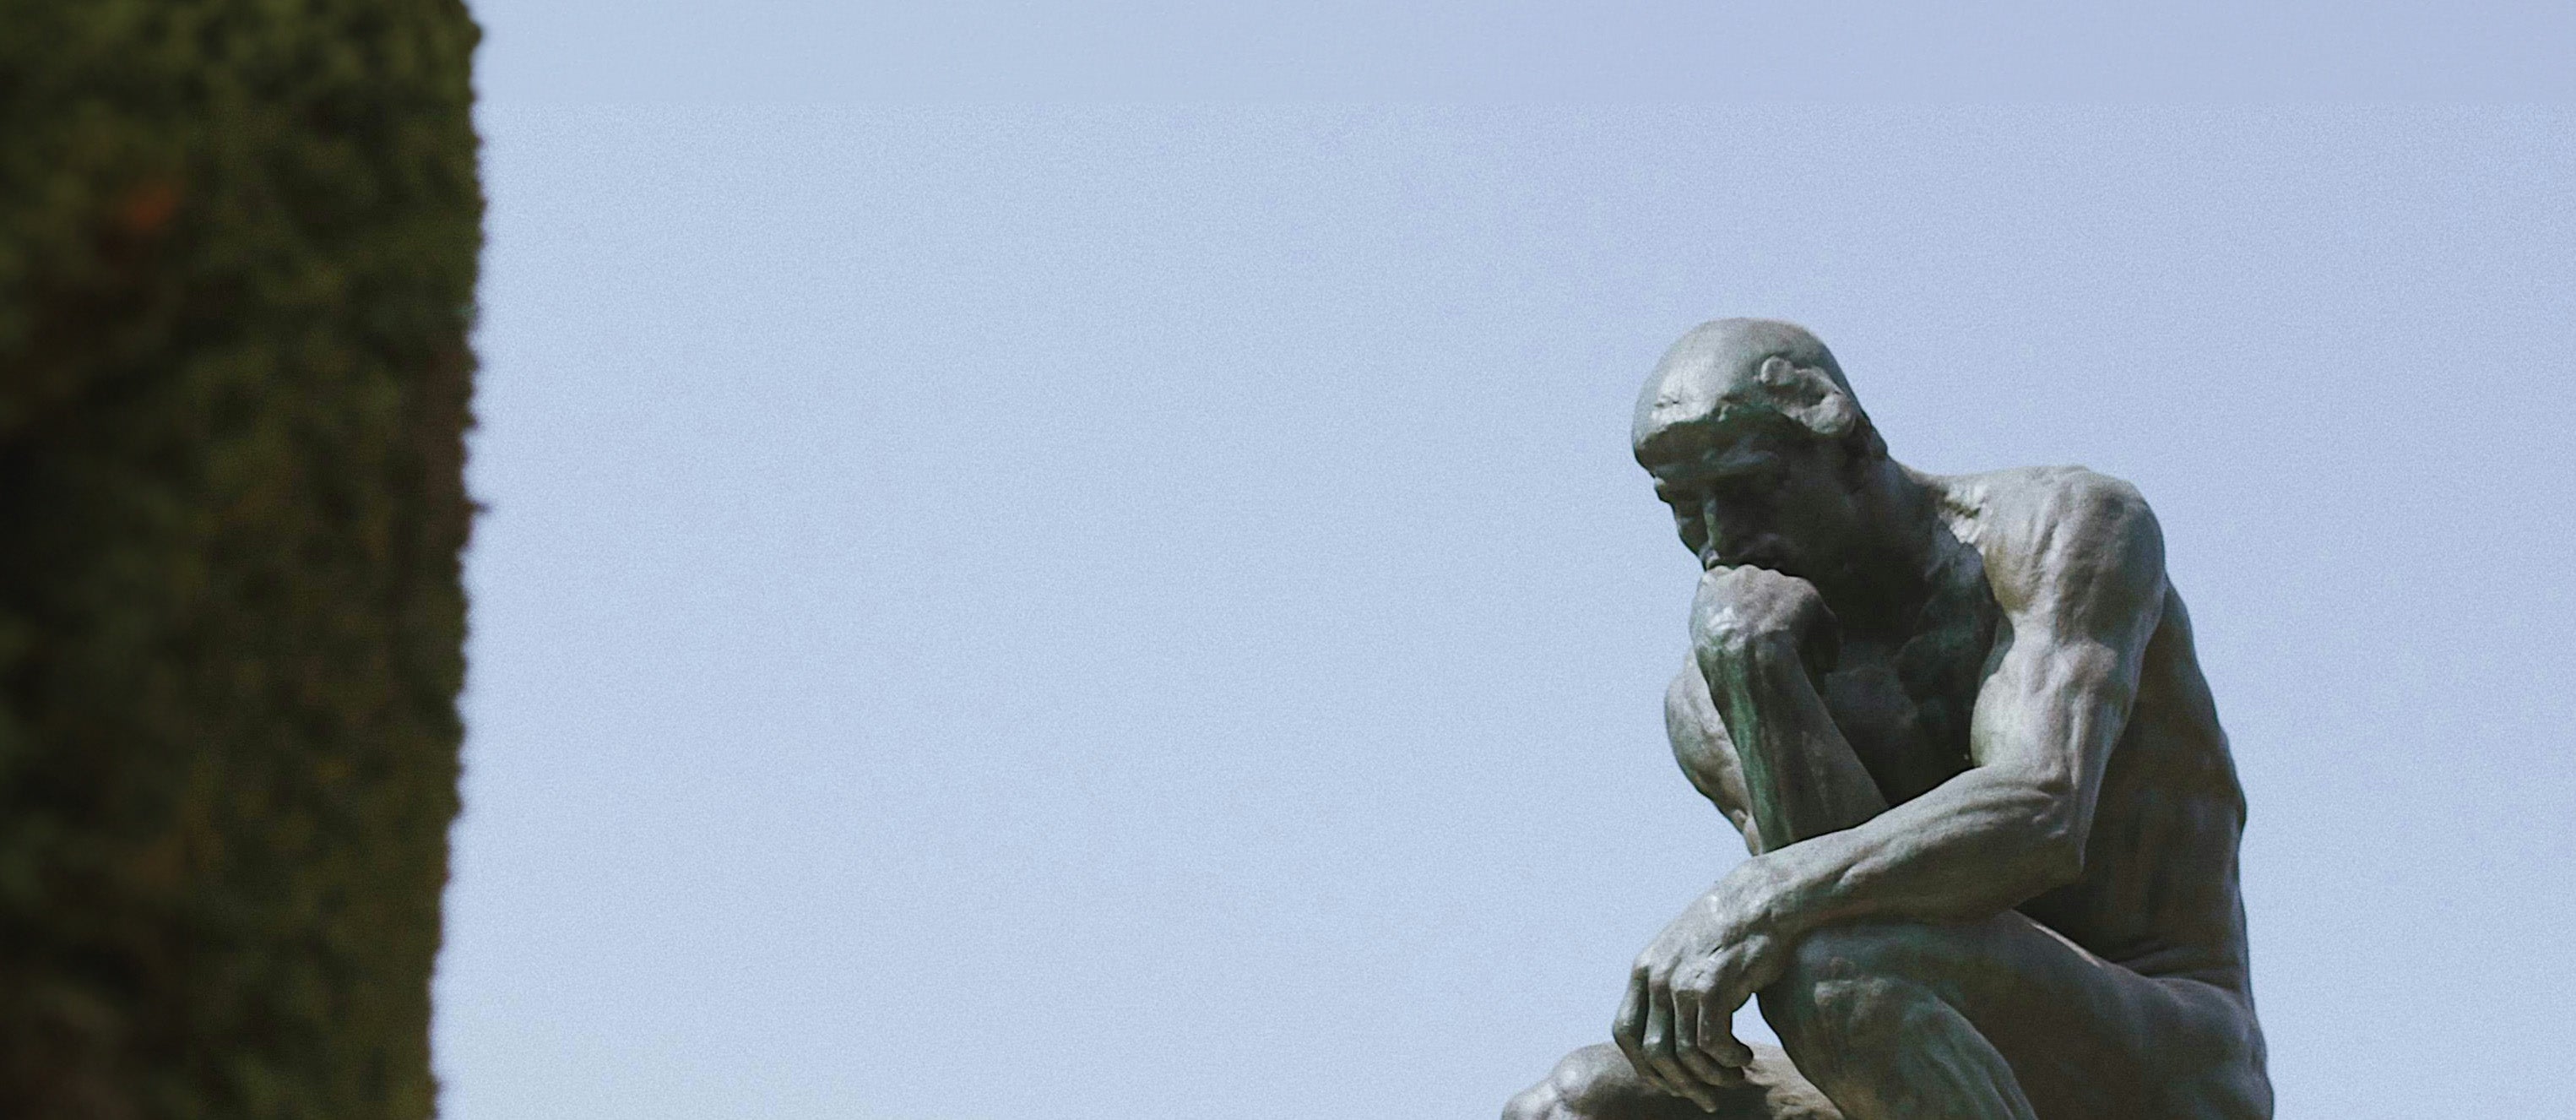 The Thinker statue in front of a blue sky with an evergreen shrub visible on the left side of the image